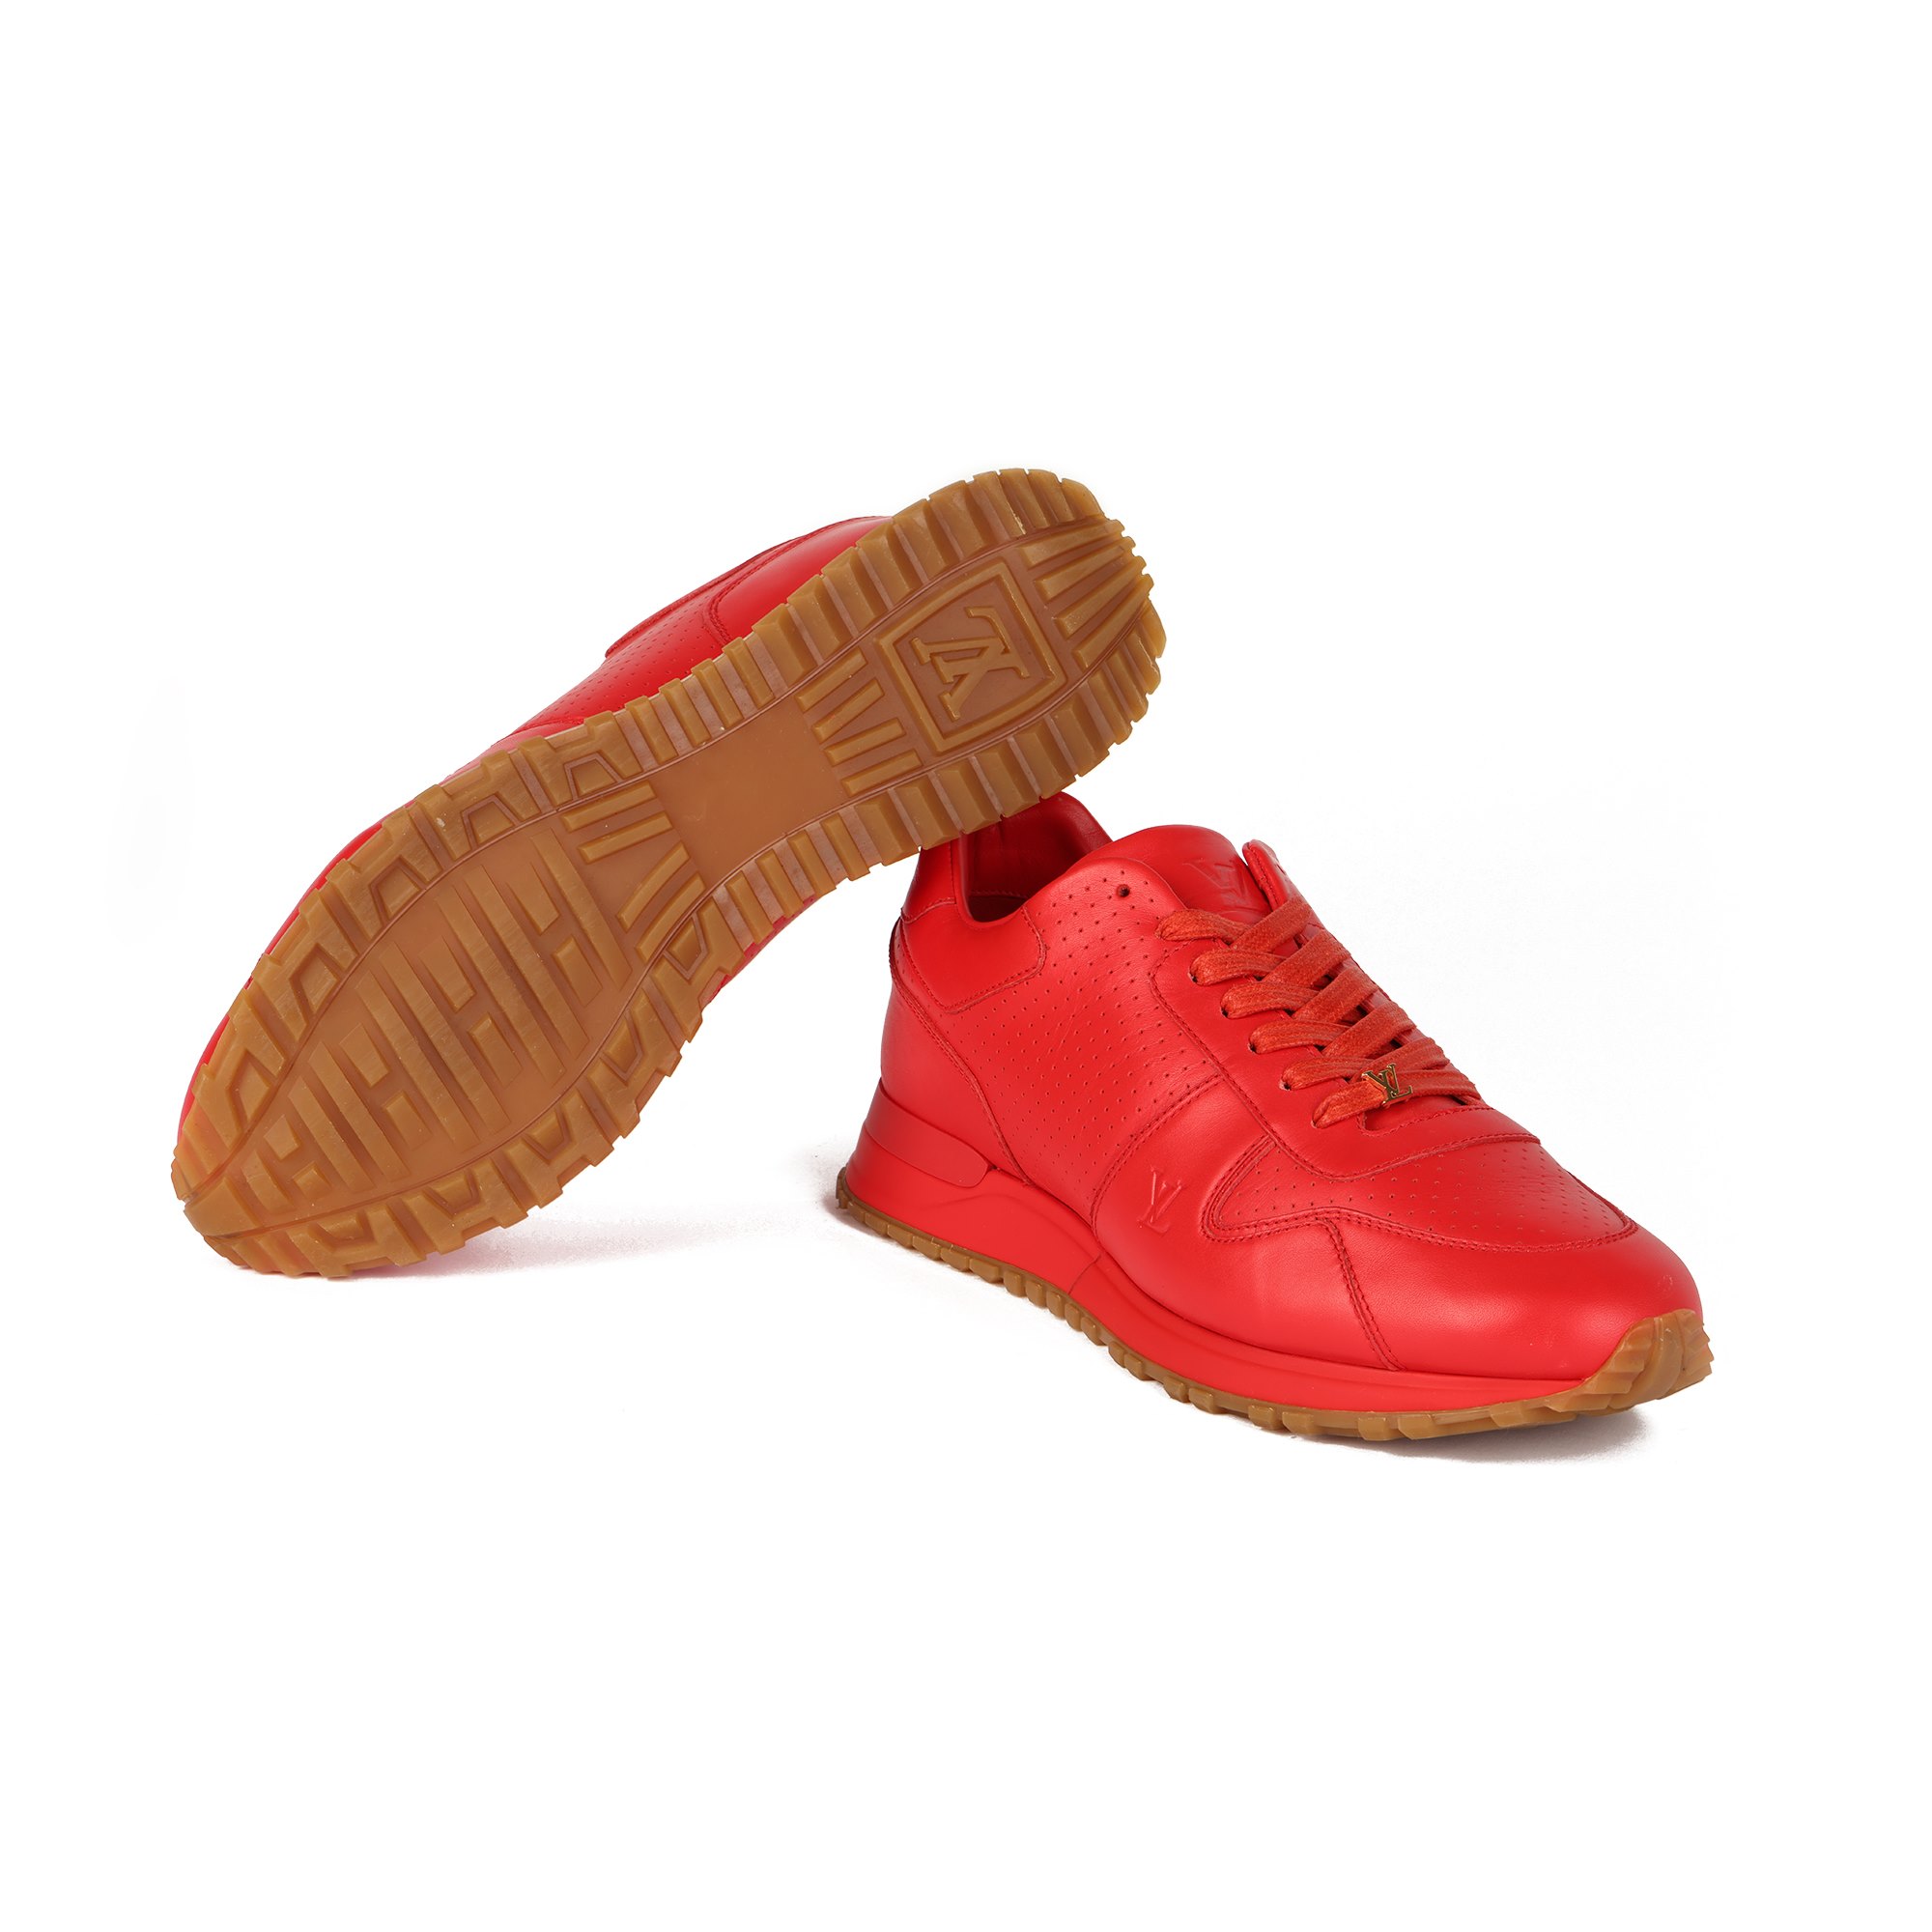 Louis Vuitton x Supreme Red Leather Run Away Sneakers - Size 8